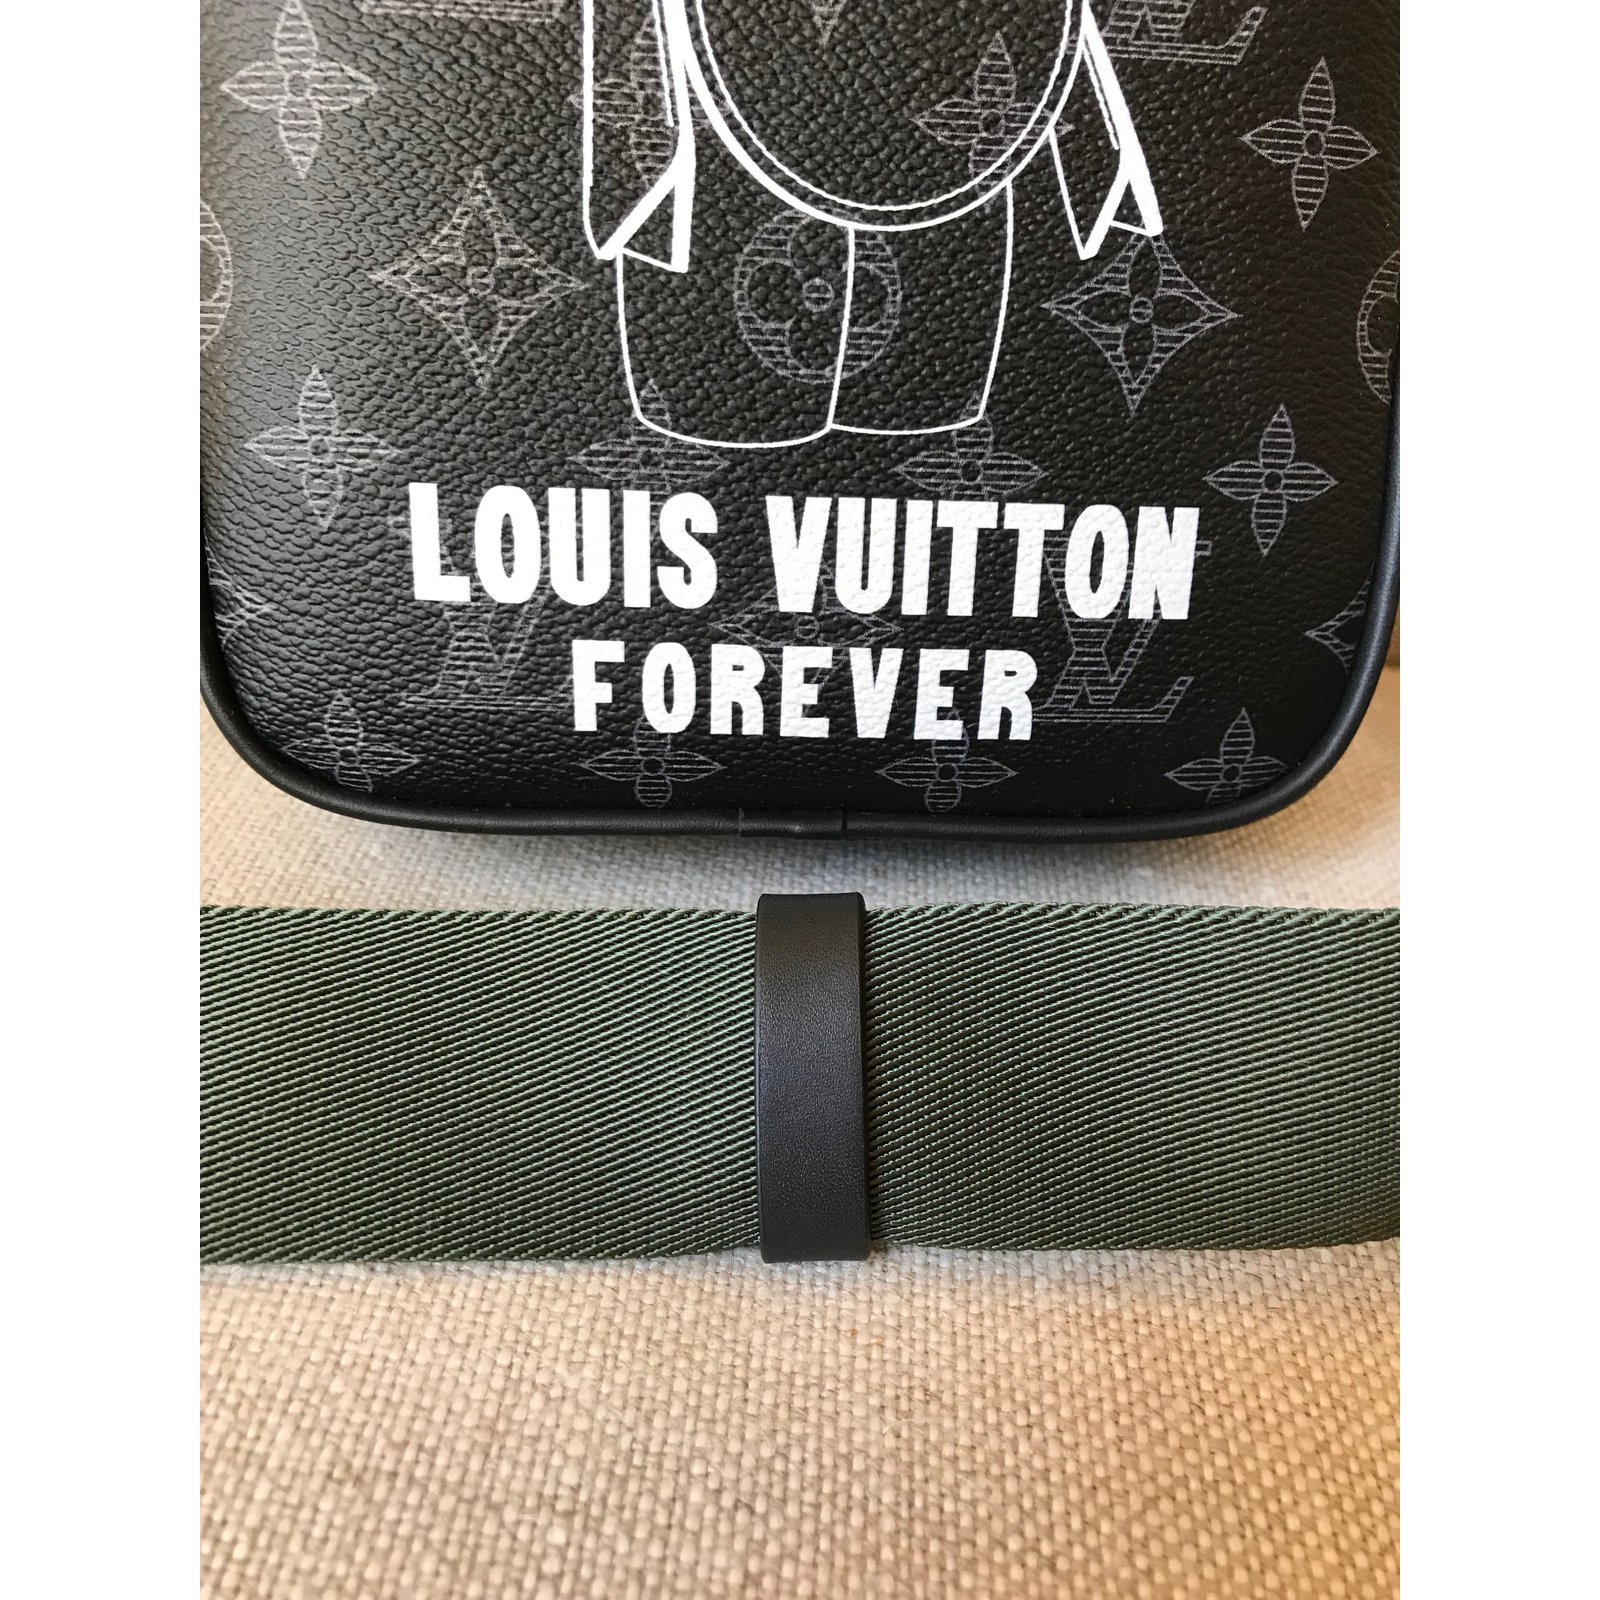 Louis Vuitton, Bags, Like New Louis Vuitton Vivienne Forever Danube Pm  Crossbody Bag In Eclipse Black